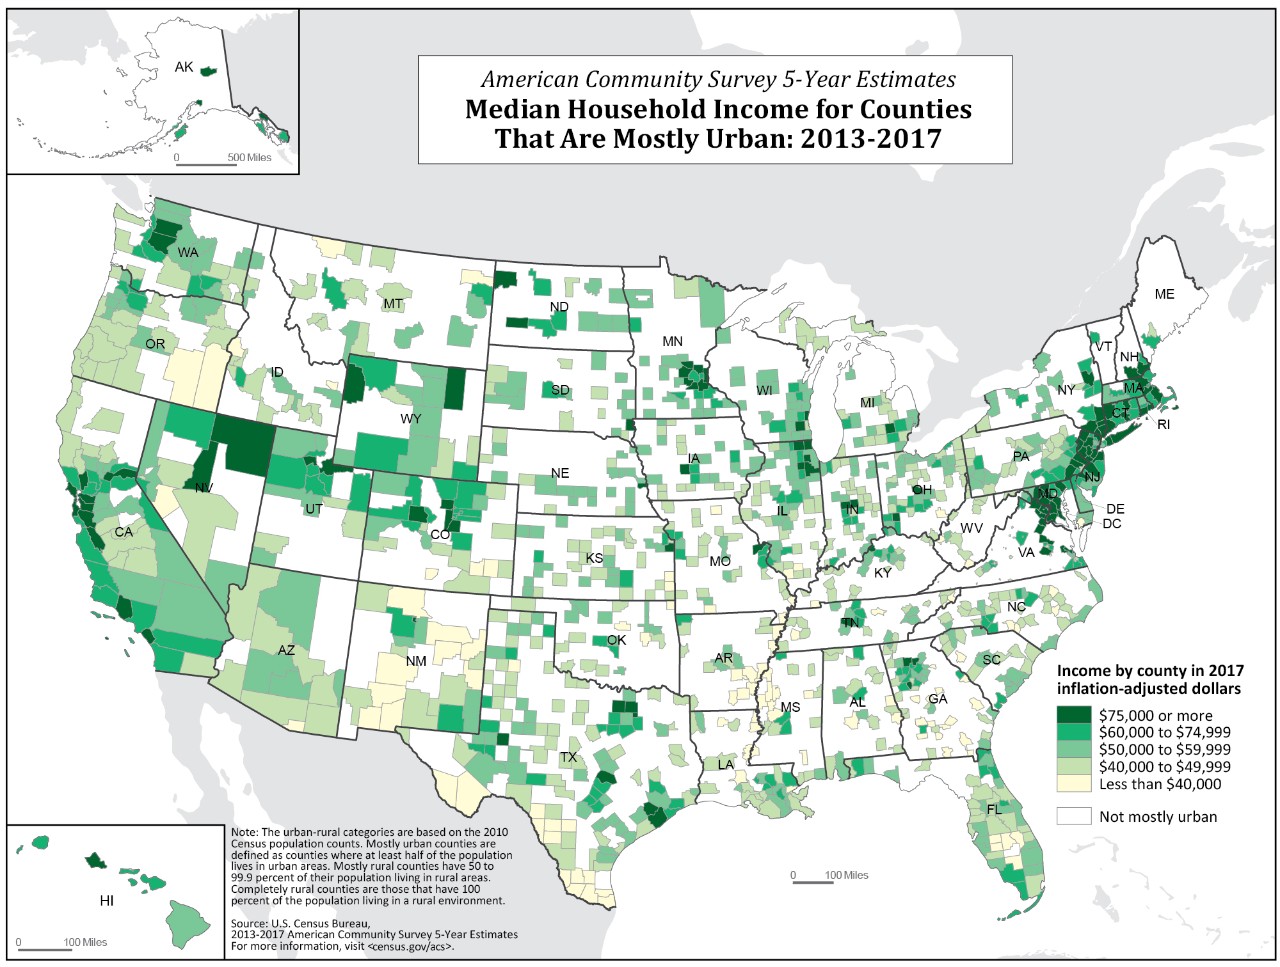 Median Household Income for Counties That Are Mostly Urban: 2013-2017